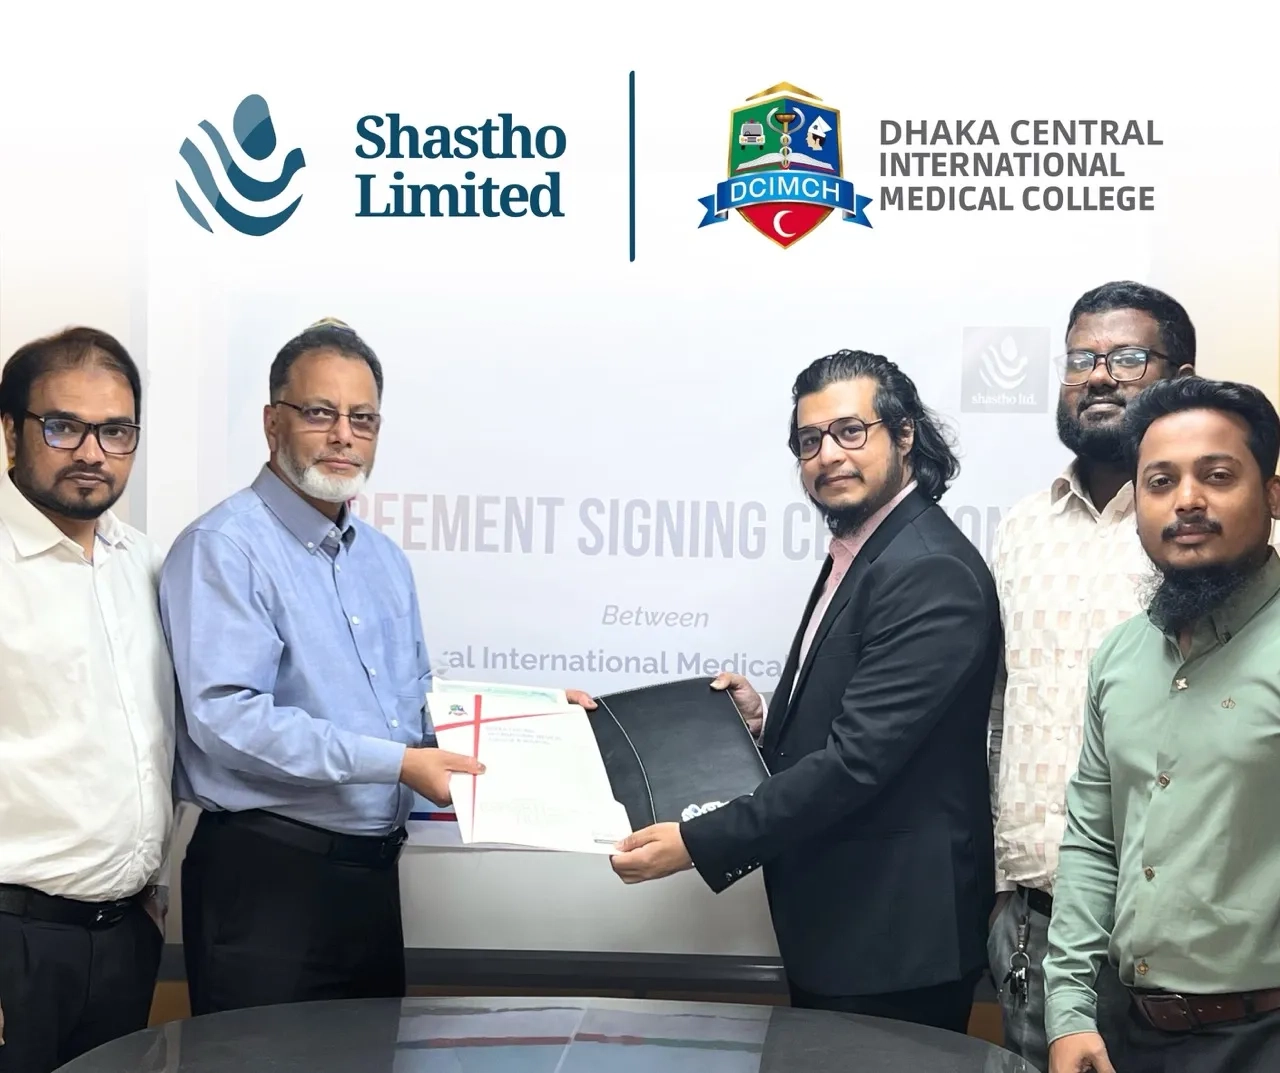 Collaboration with Dhaka Central International Medical College & Hospital